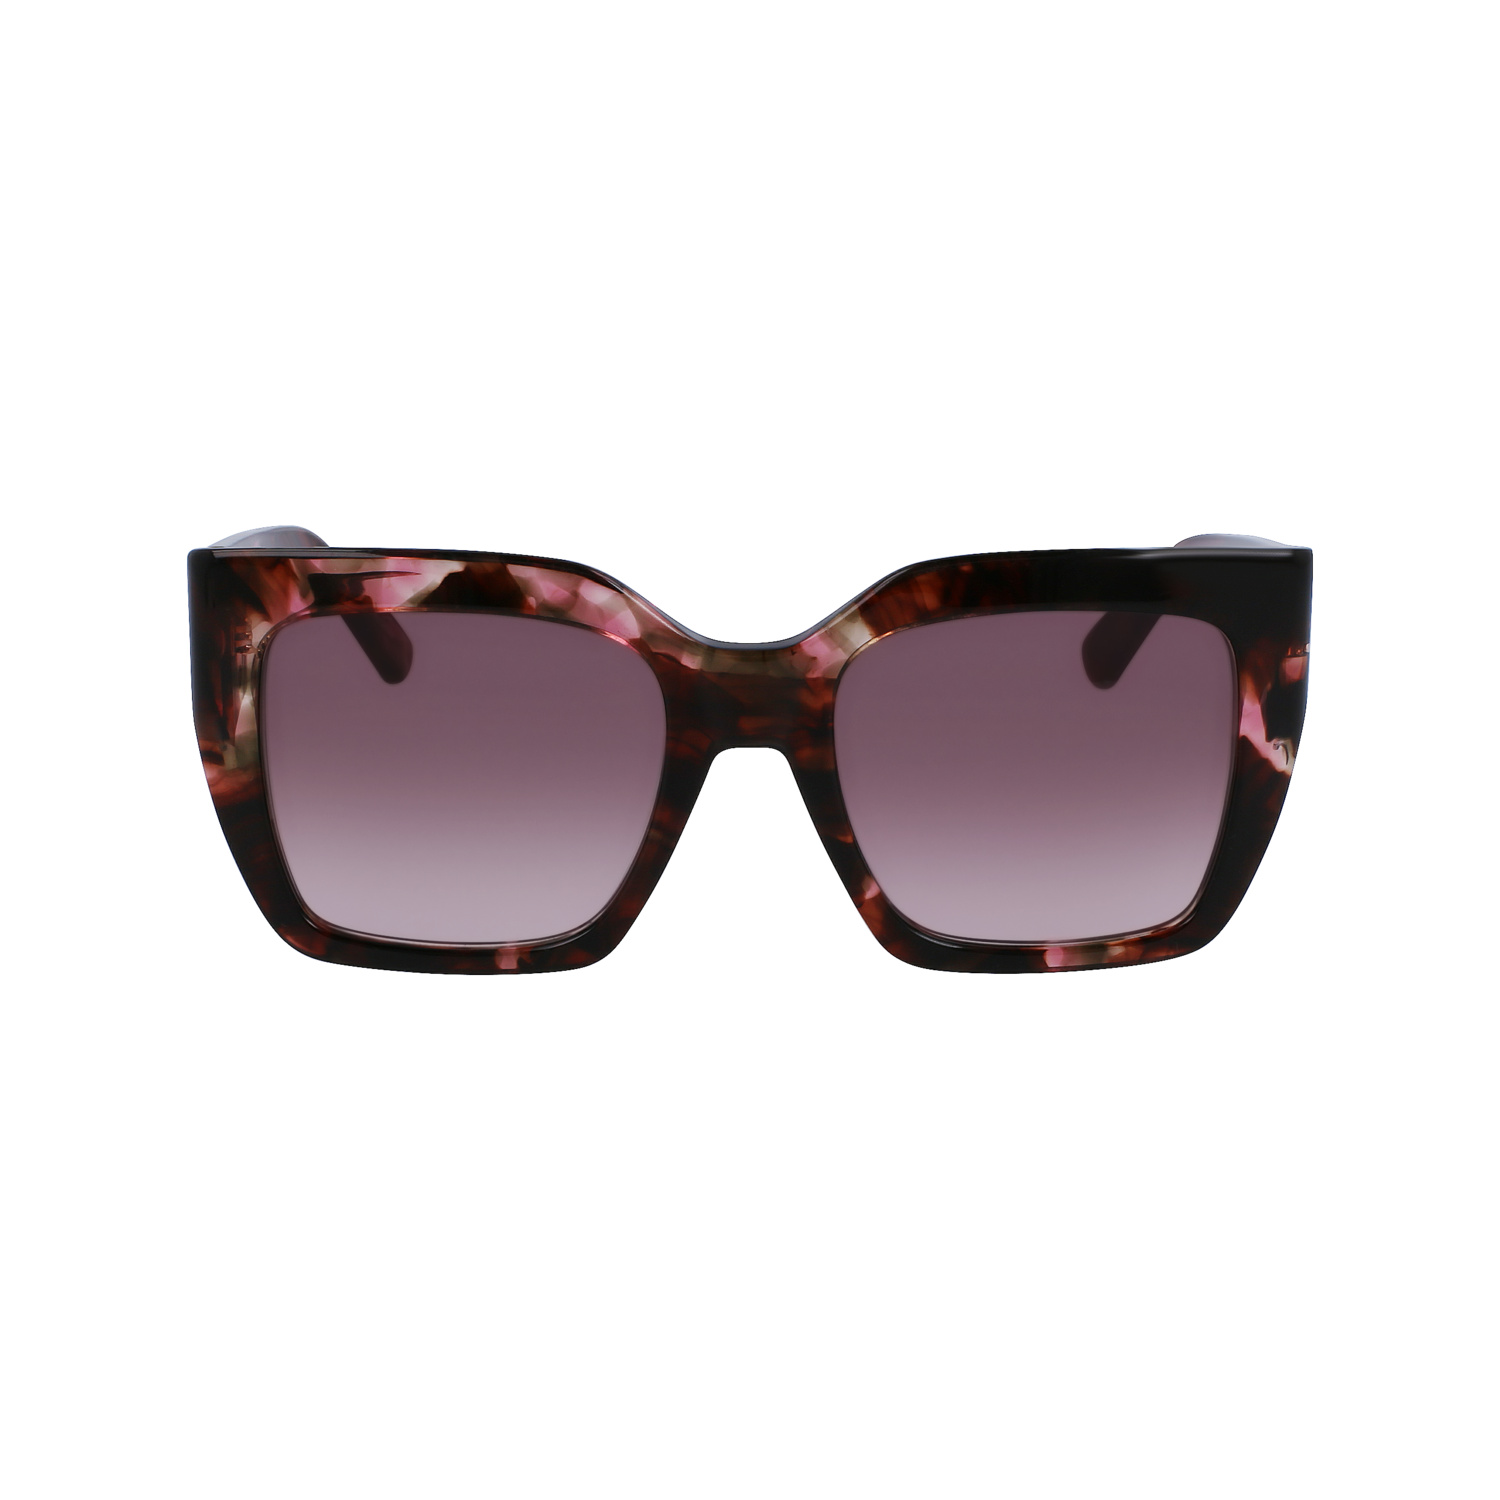 Longchamp Sunglasses In Pink Turquoise